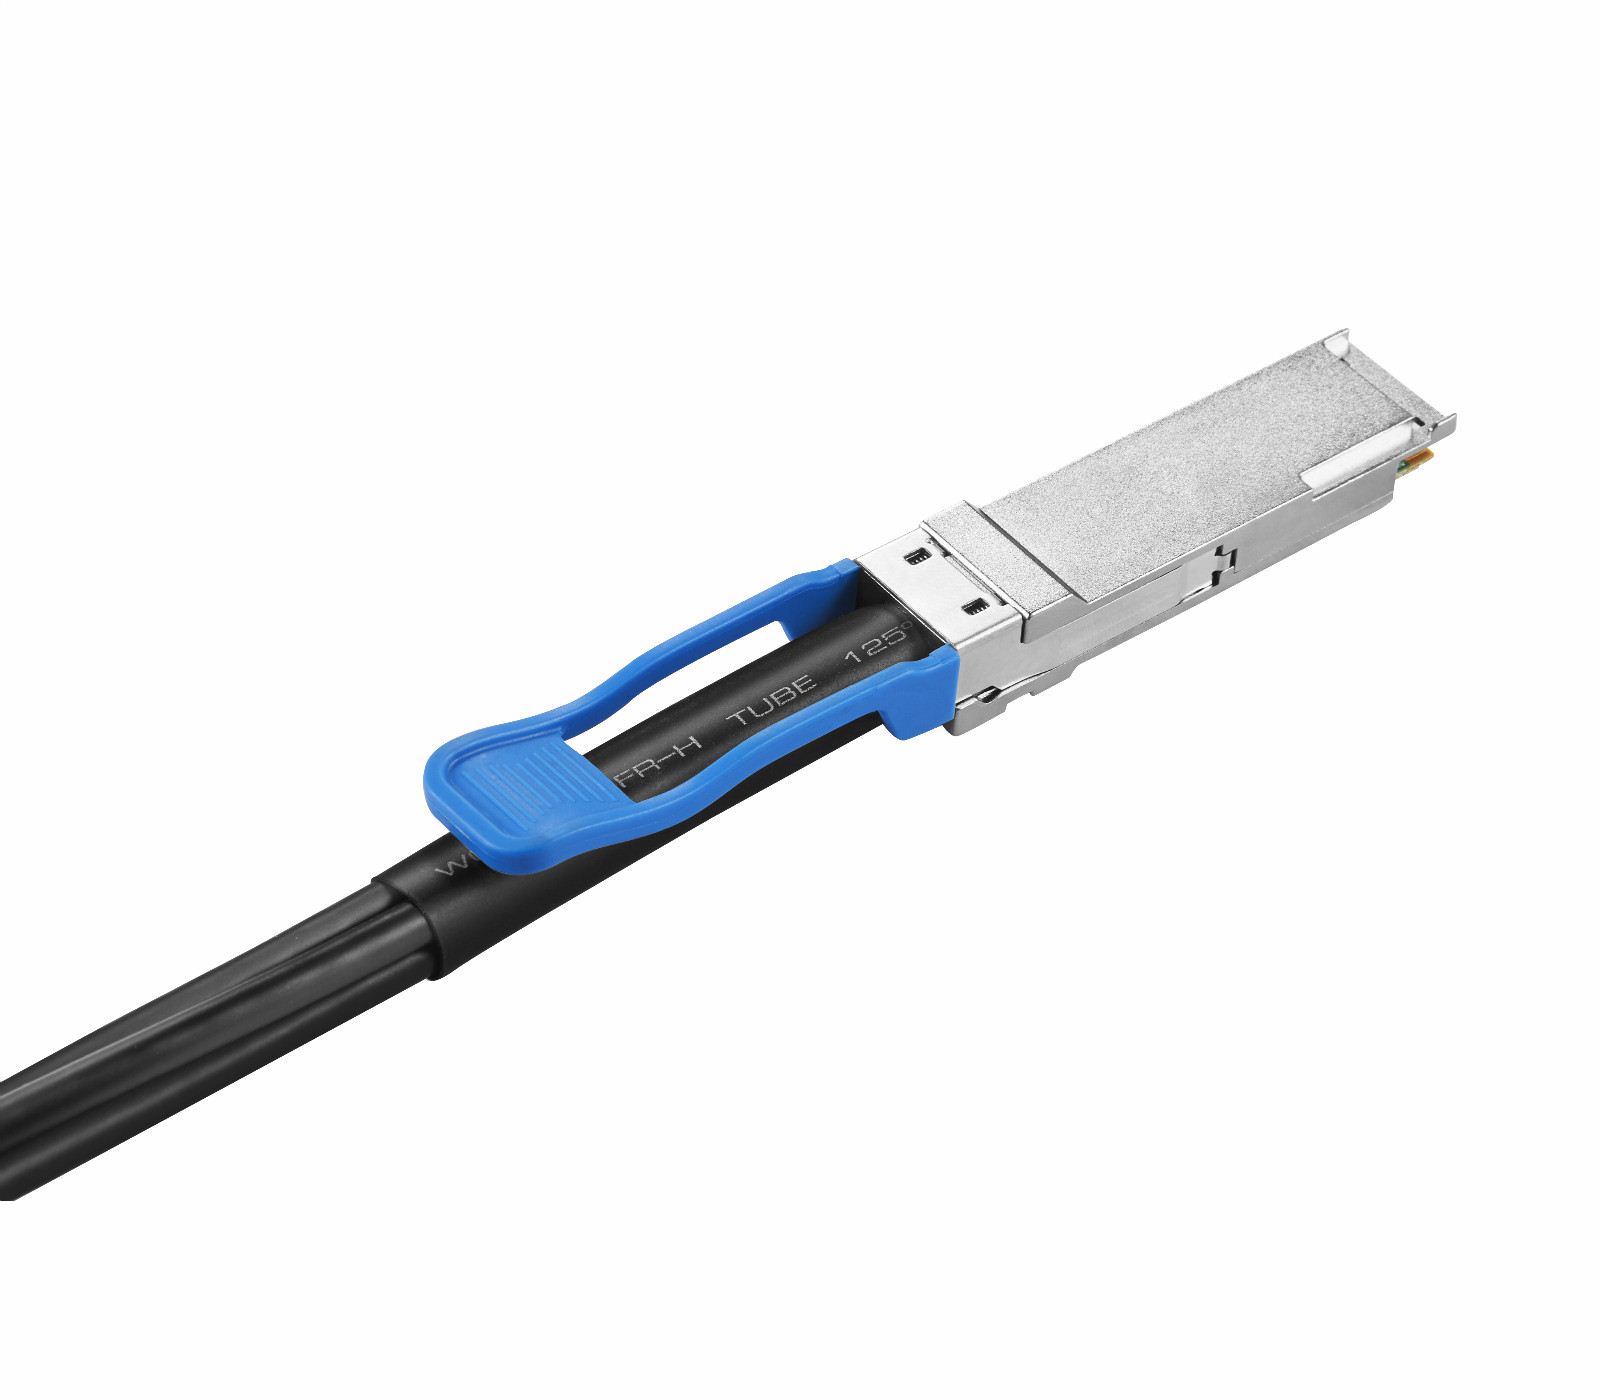 100G QSFP28 DACpreferred HTD-Infor,its price is areasonable